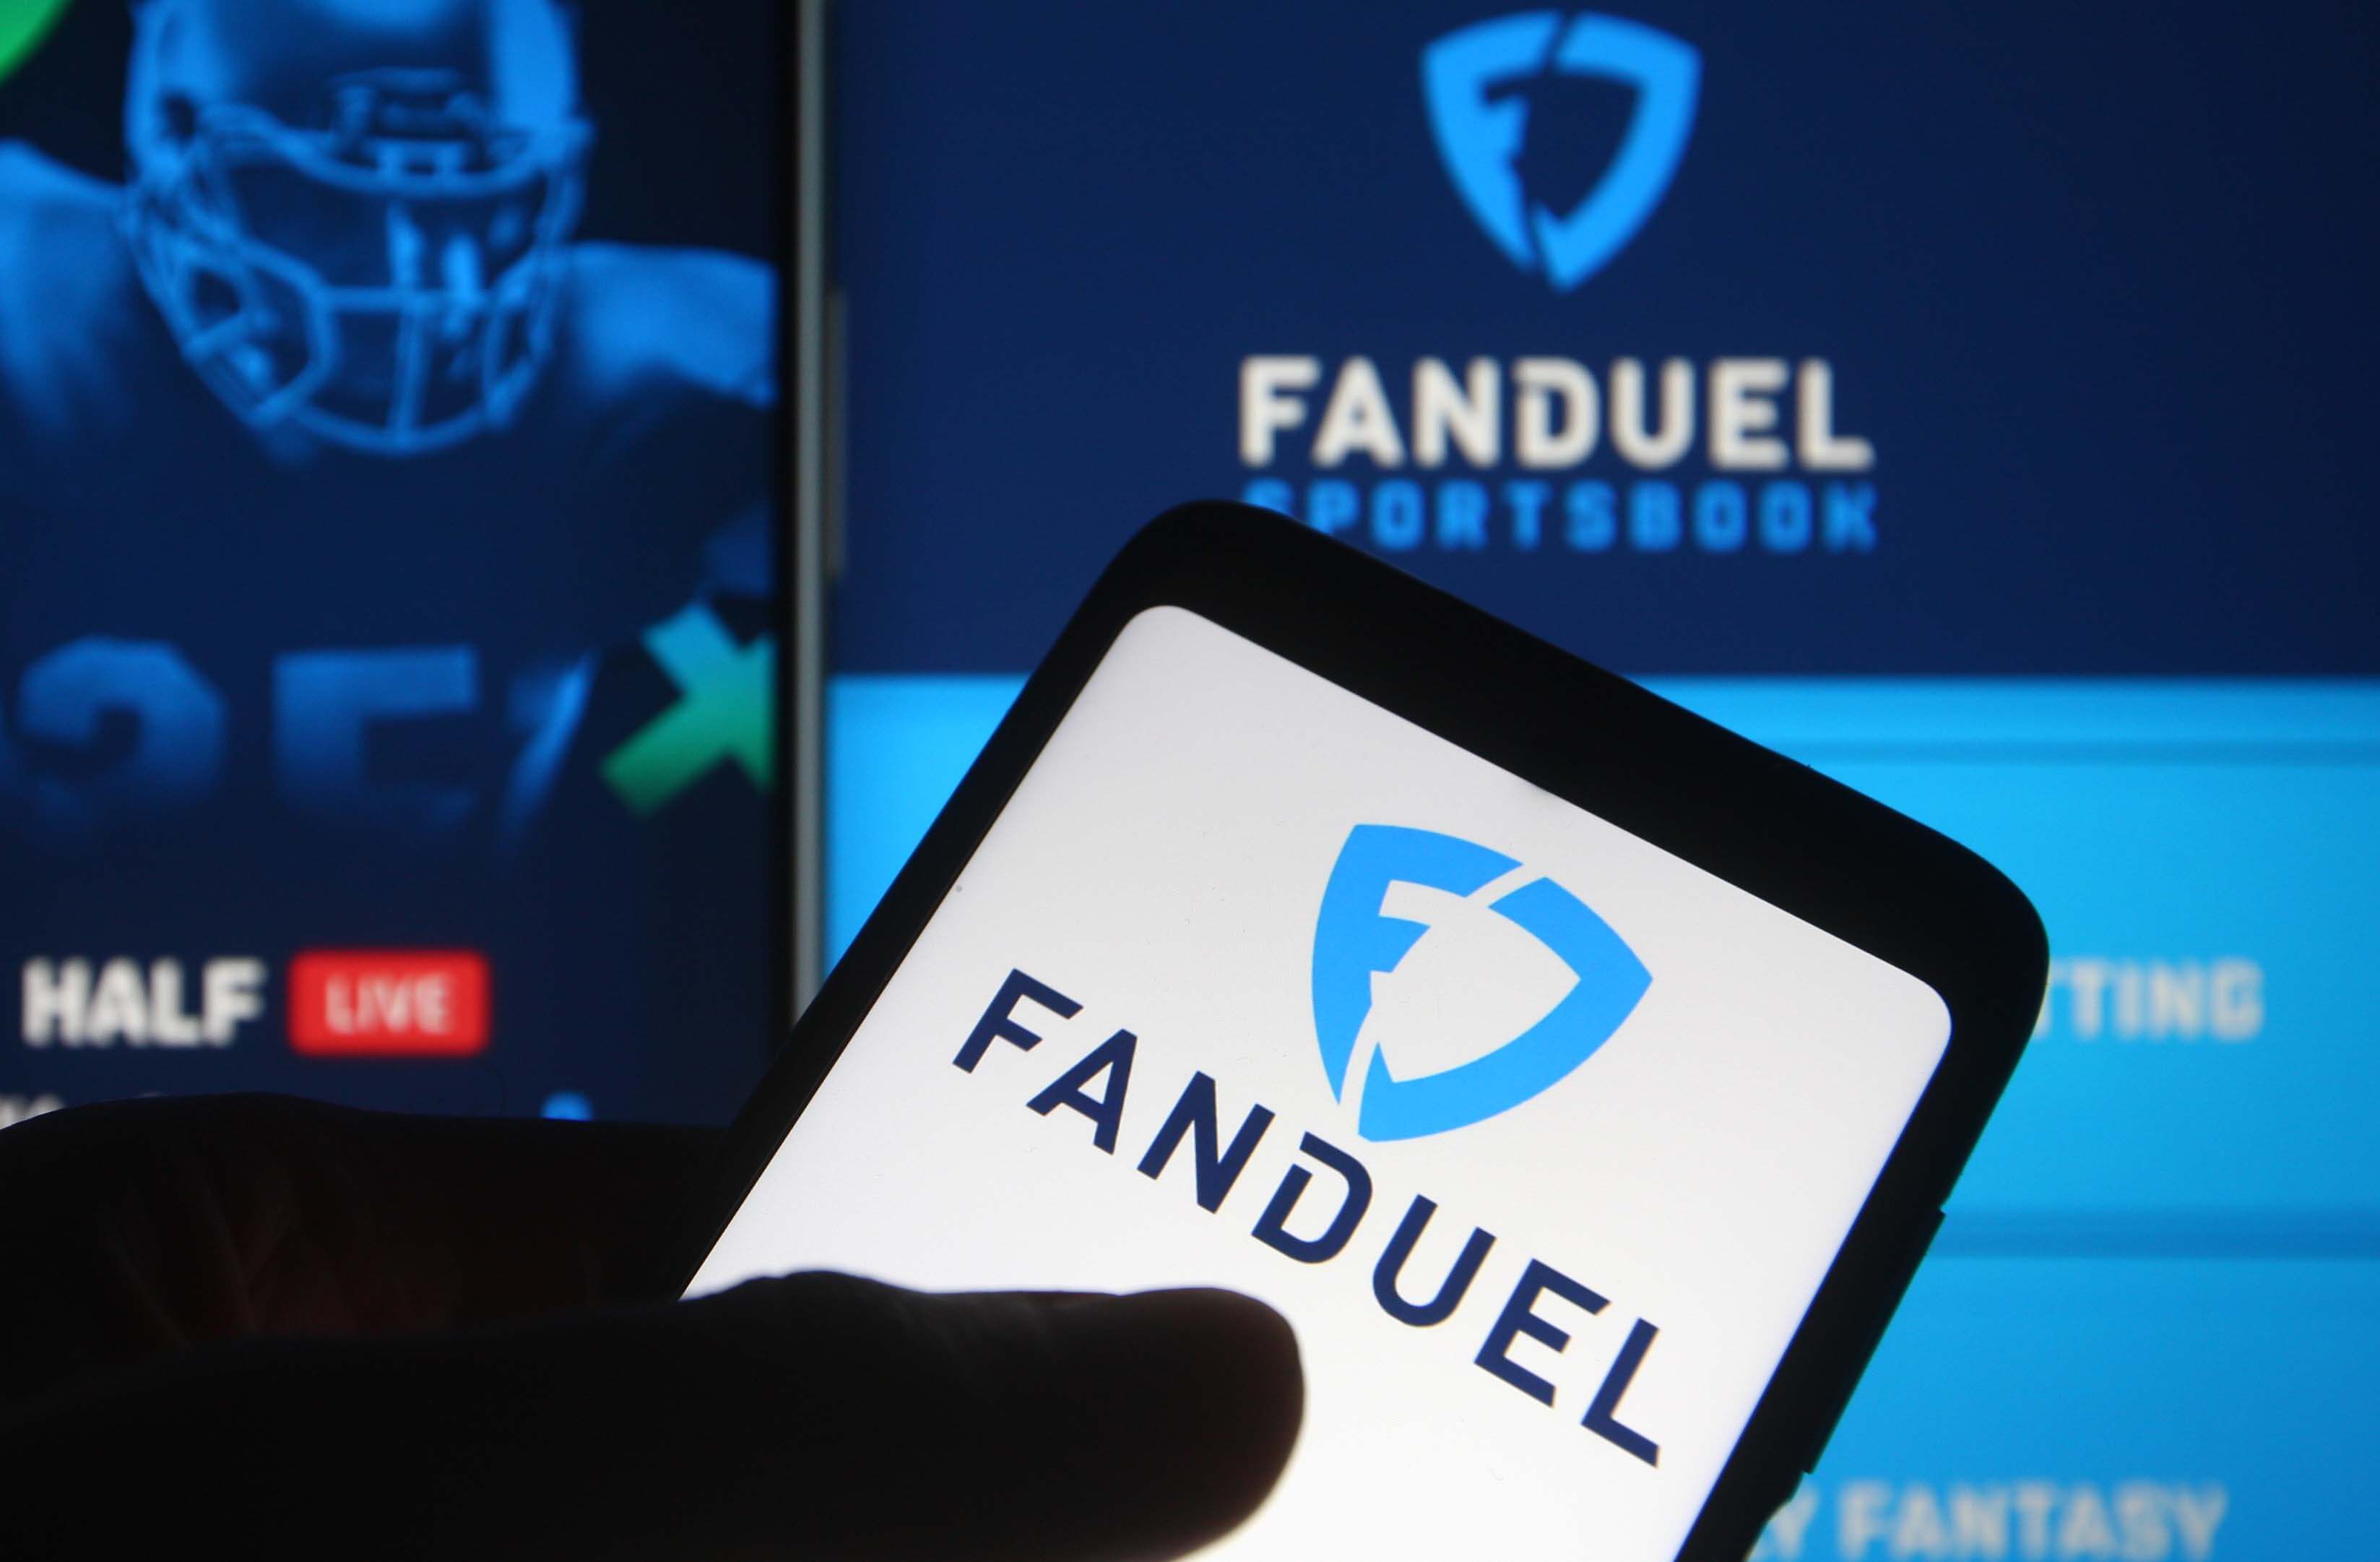 GambetDC Announces Plans to Shutter in D.C., FanDuel Takes Over as Subcontractor